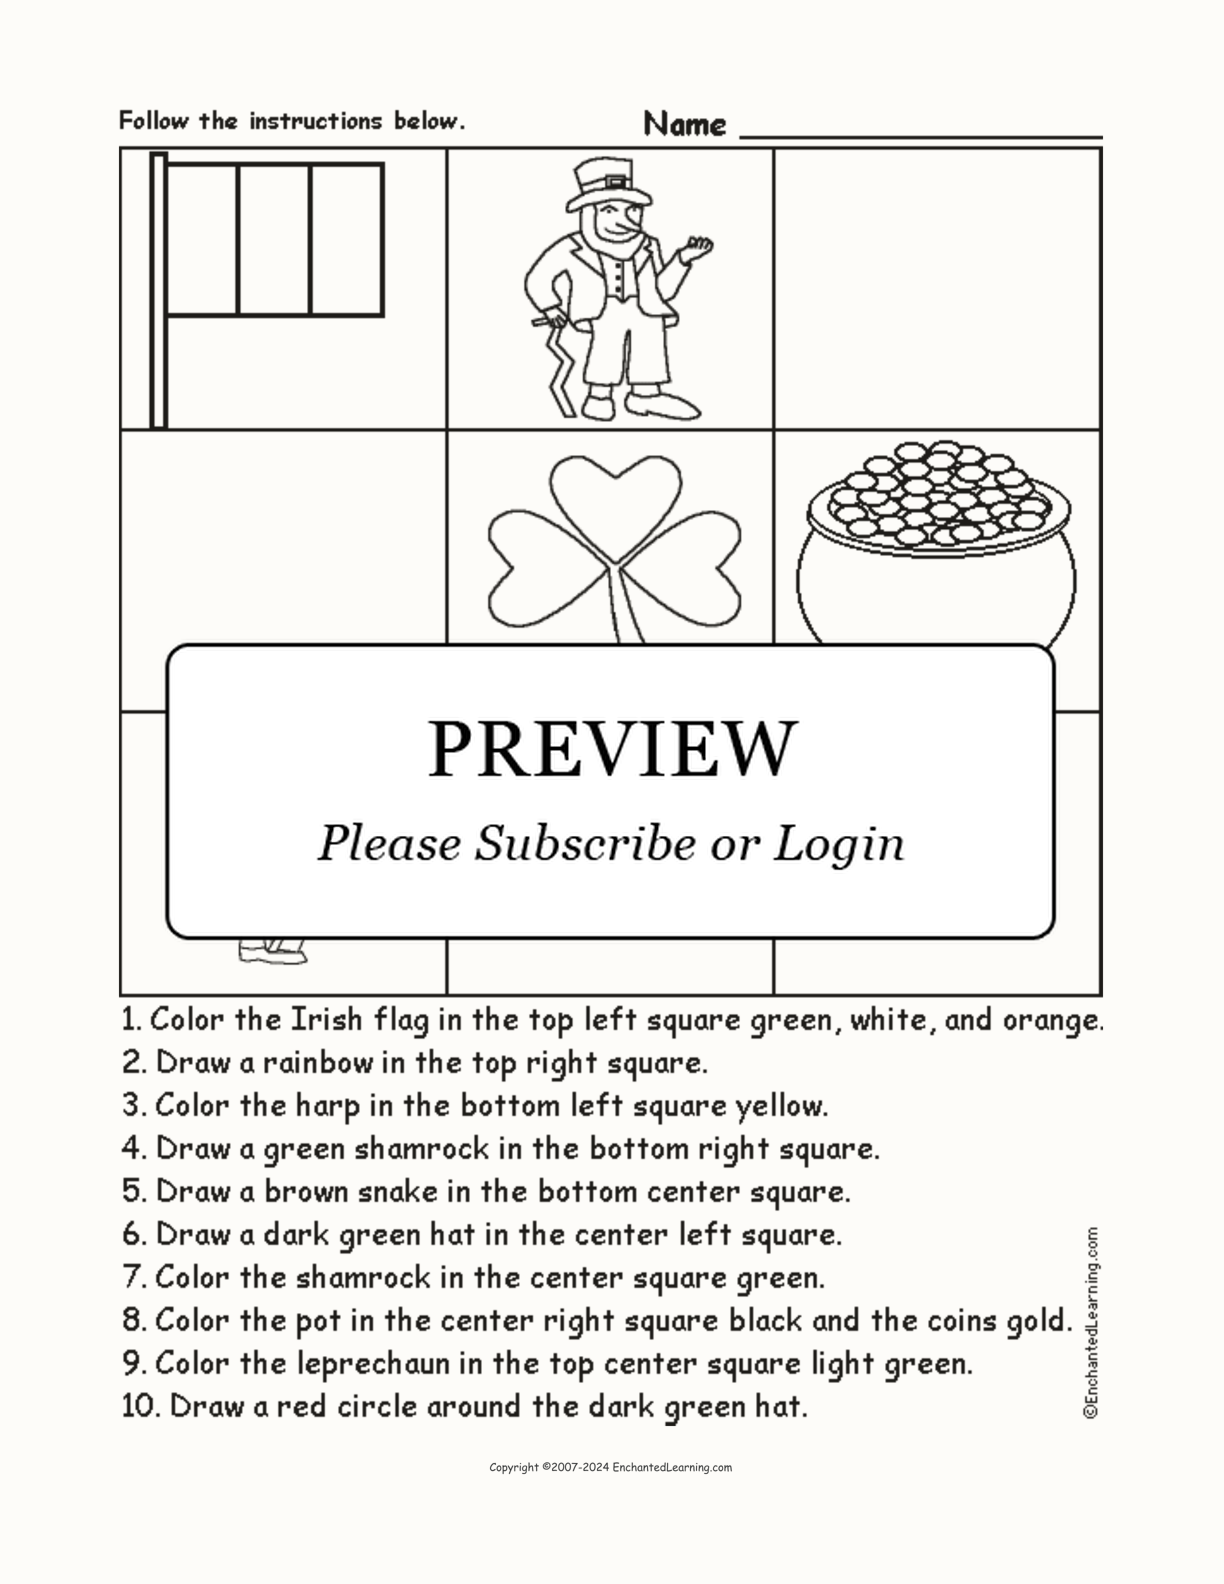 St. Patrick's Day - Follow the Instructions interactive worksheet page 1